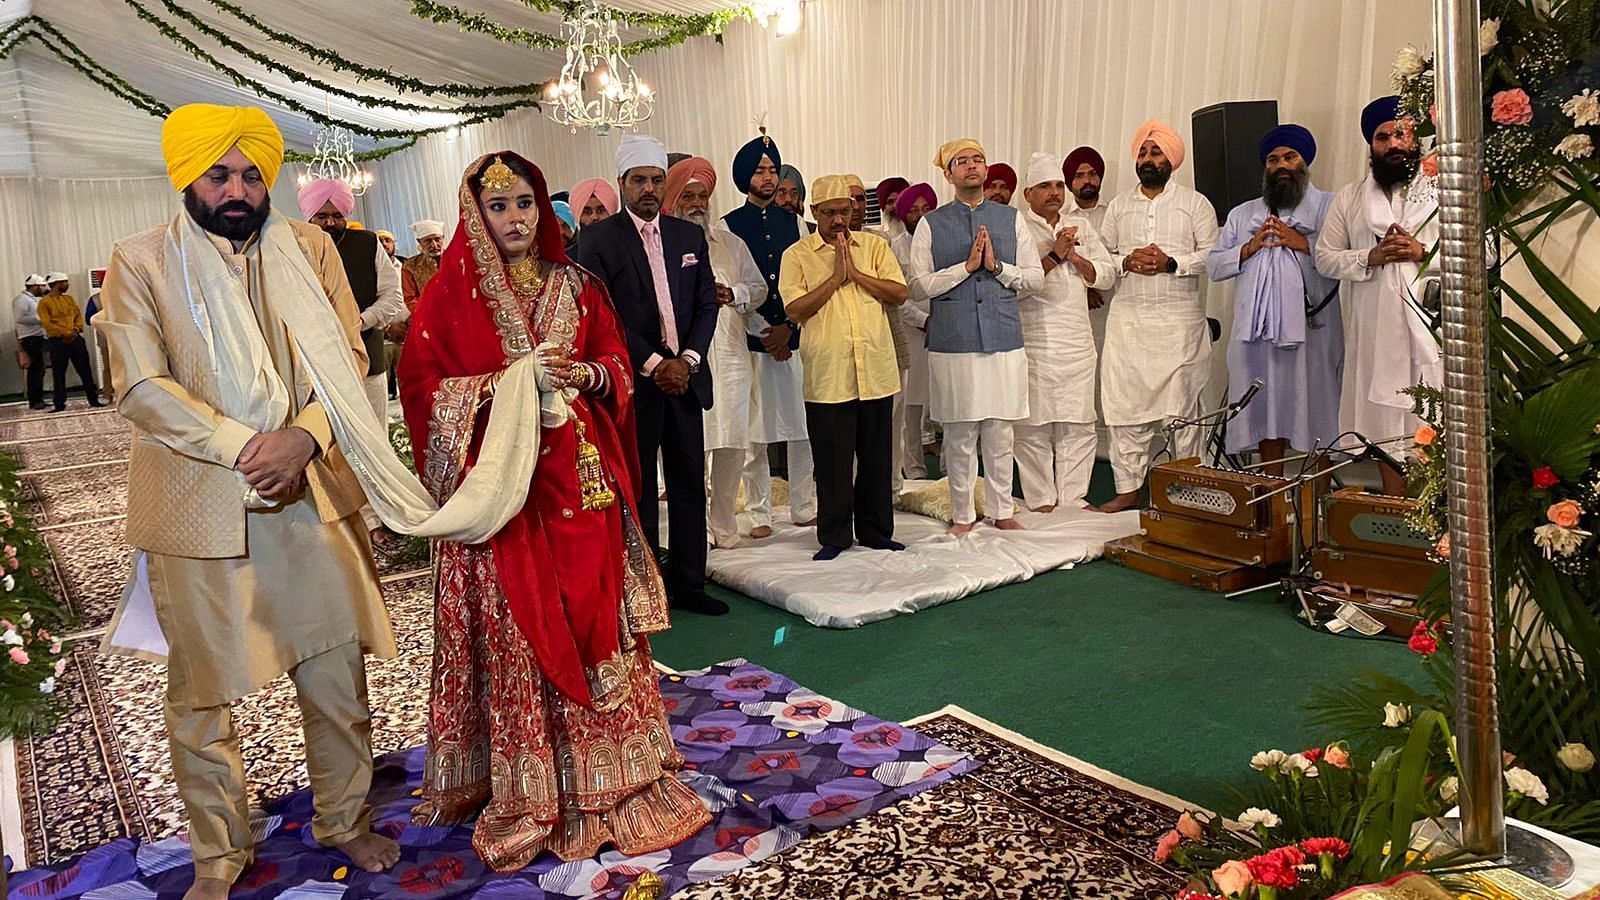 <div class="paragraphs"><p><a href="https://www.thequint.com/topic/bhagwant-mann">Punjab Chief Minister Bhagwant Mann</a> got married on Thursday, 7 July, to <a href="https://www.thequint.com/news/india/punjab-chief-minister-bhagwant-mann-wedding-who-is-dr-gurpreet-kaur-married-wife-chandigarh#read-more">Gurpreet Kaur</a>, at a private ceremony at his house later in the day in <a href="https://www.thequint.com/news/politics/punjab-cm-bhagwant-mann-moves-resolution-against-centre-decision-central-rules-chandigarh">Chandigarh</a>.</p></div>